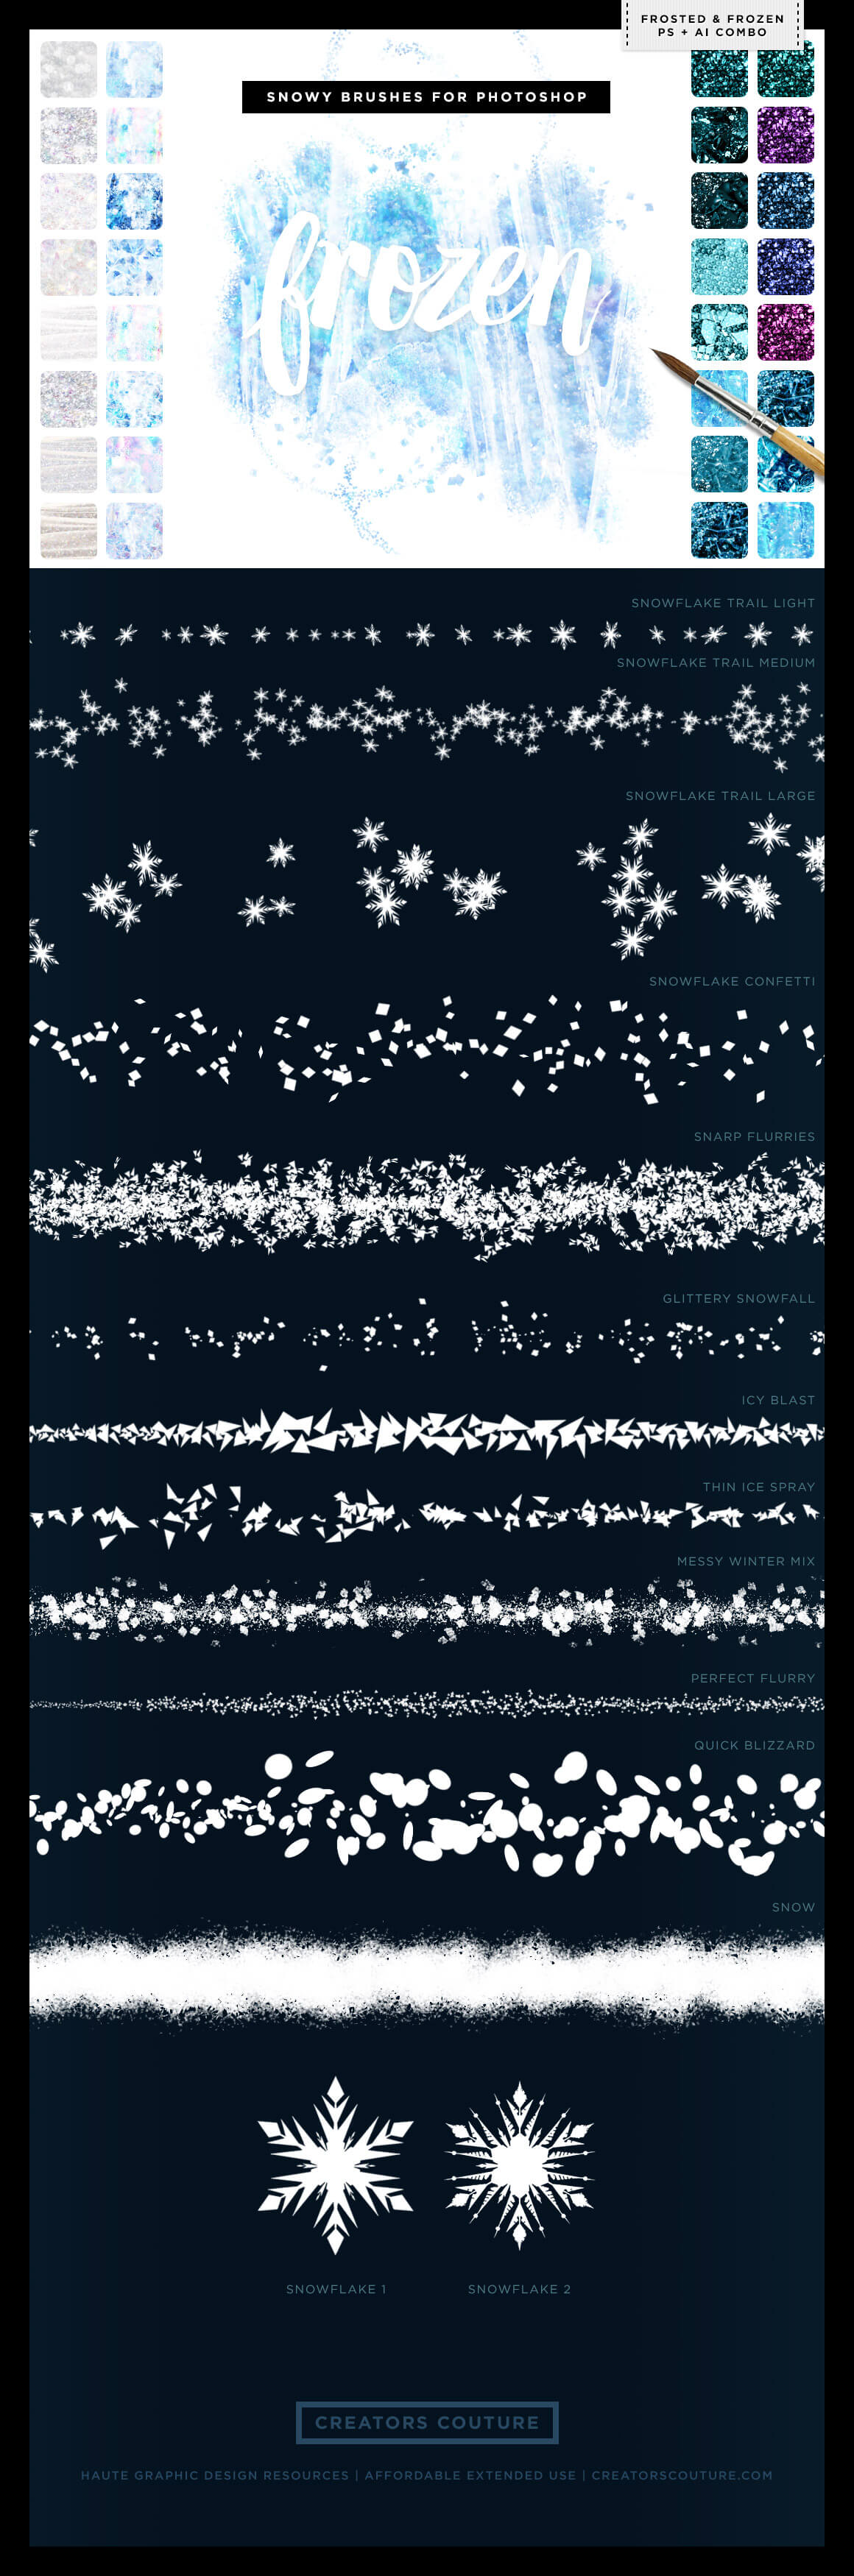 preview image of digital brushes for photoshop, snow and ice brushes